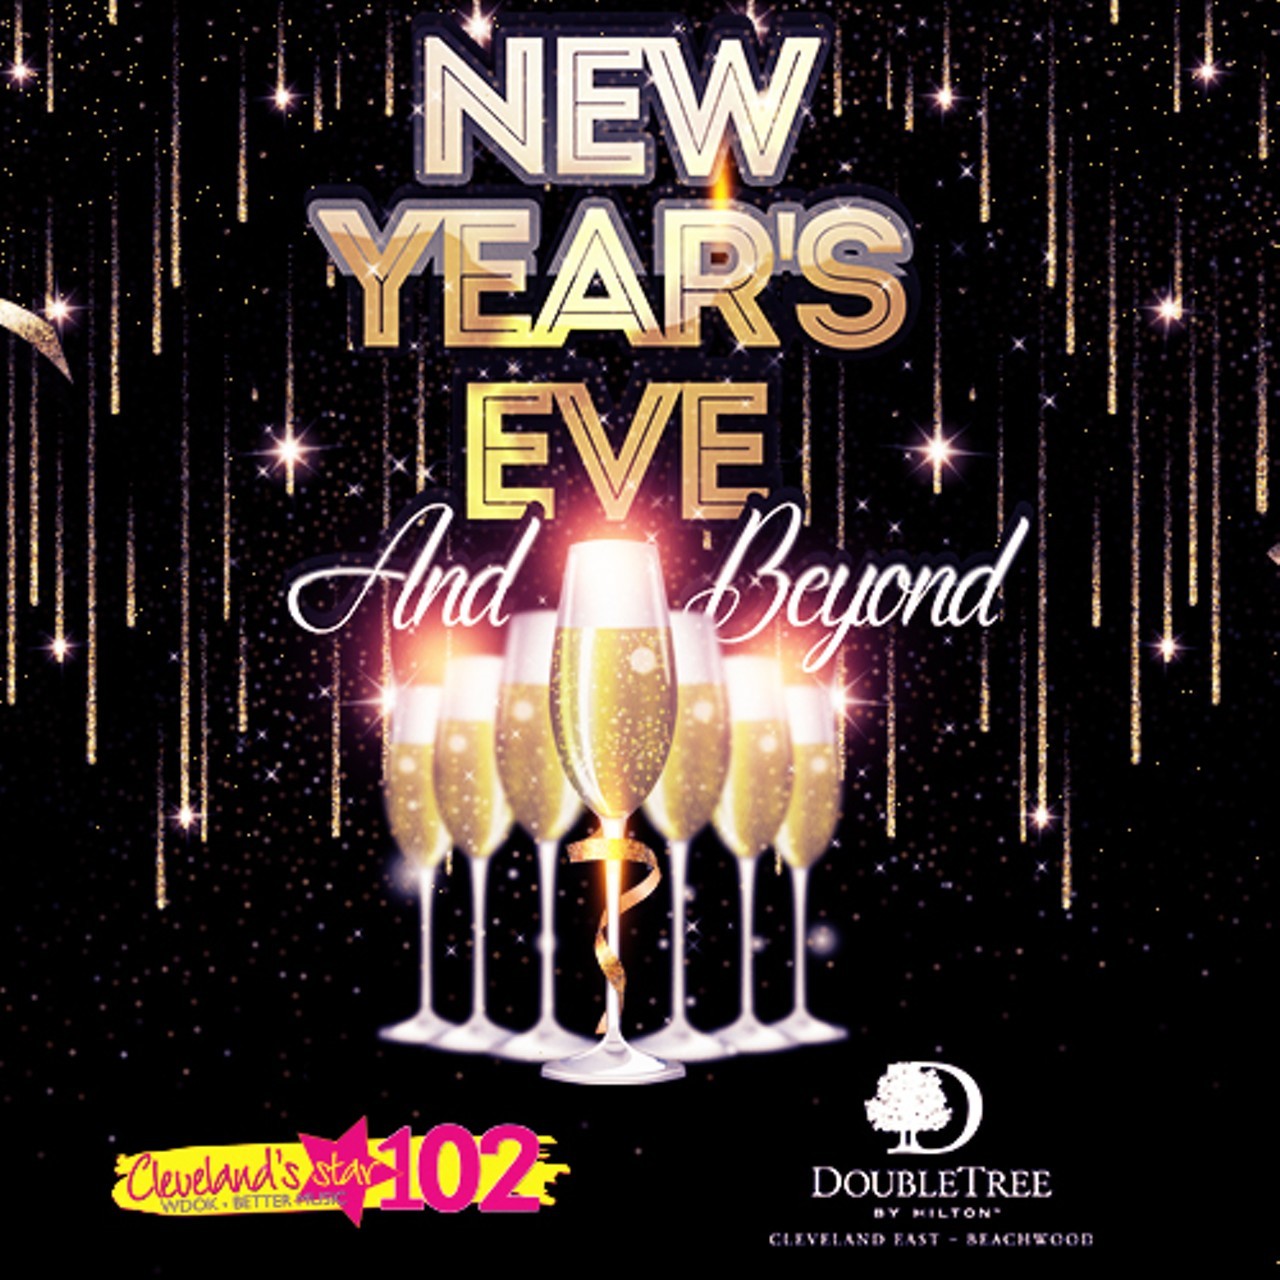 Star102 Presents New Year's Eve and Beyond 
When: Sat., Dec. 31, 7:30 p.m.-1 a.m. 
Phone: 216-464-5950 
Rock into 2017 at our New Year's Eve and Beyond Party featuring a 5 hour open bar, hors d'oeuvre, station buffet dinner, dessert buffet and champagne toast at midnight with late night bites. Dance to the sounds of Run Avril Run and spend the night in one of our well-appointed King guest rooms. Full breakfast buffet included. Doors open at 7:30pm, Party until 1:00am. For our guests 21 and over only. (Courtesy Star102)